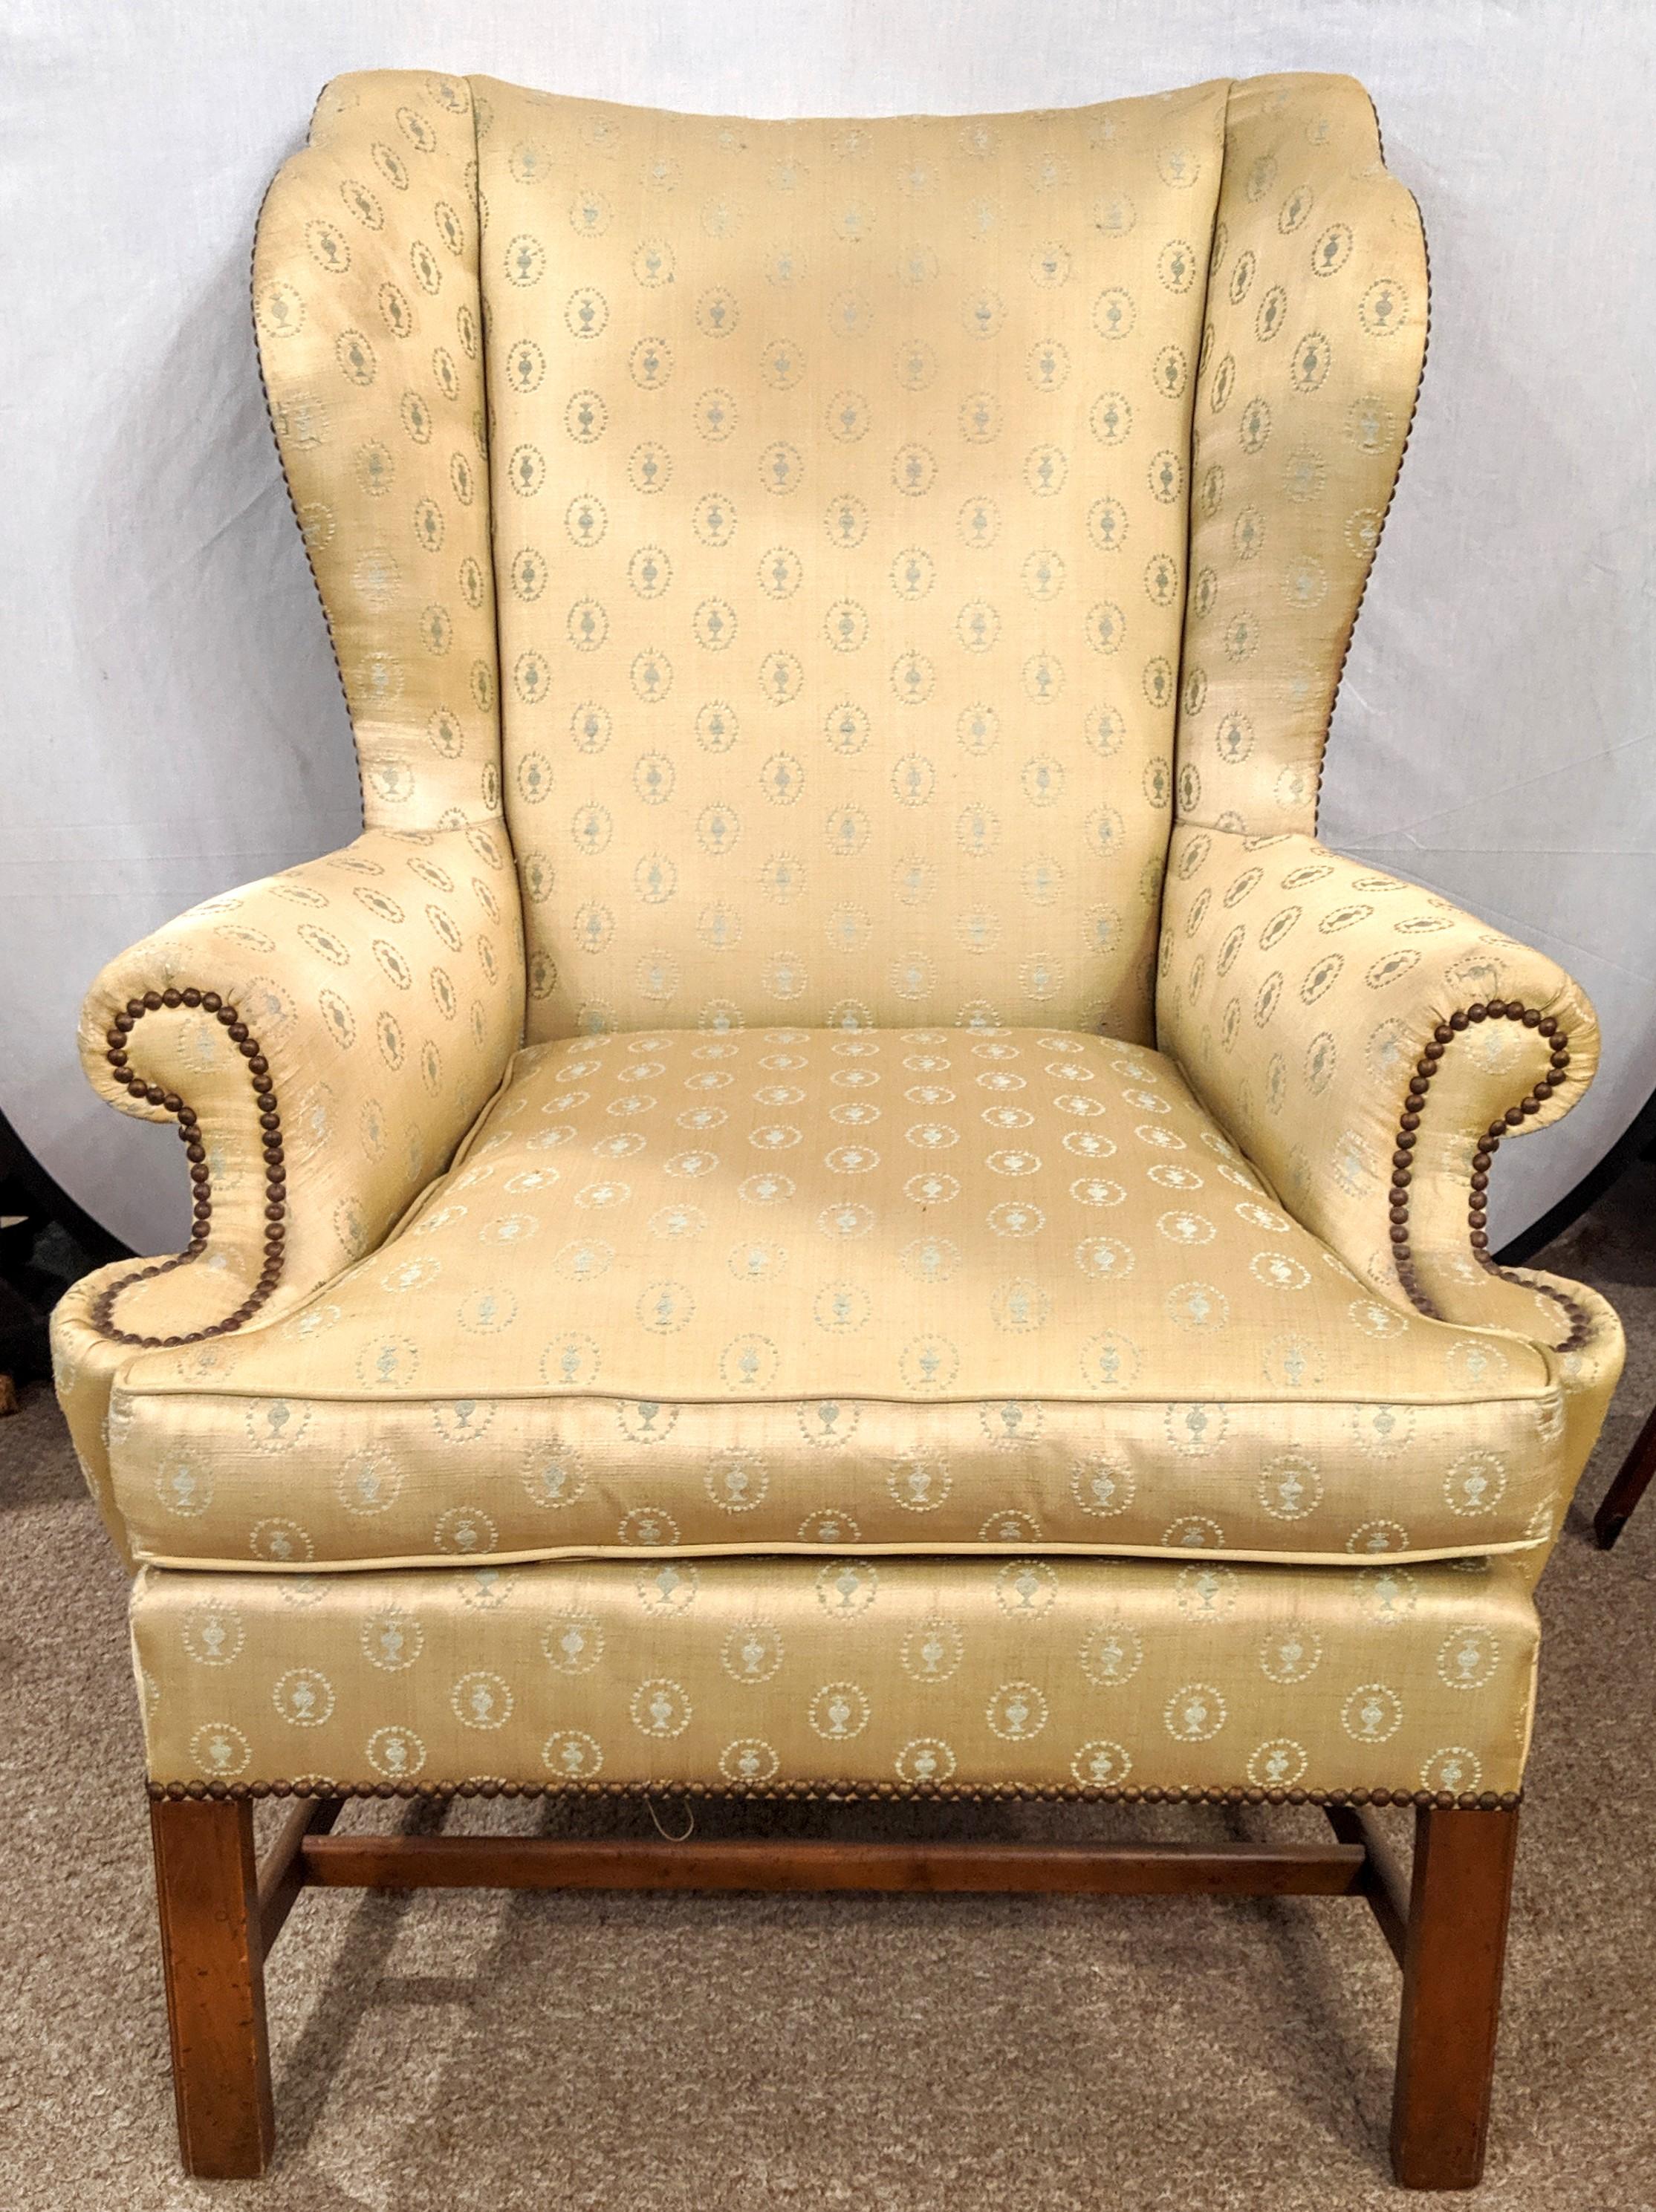  Baker Furniture Company Chippendale Wingback or Desk Chair in a Fine Fabric  2